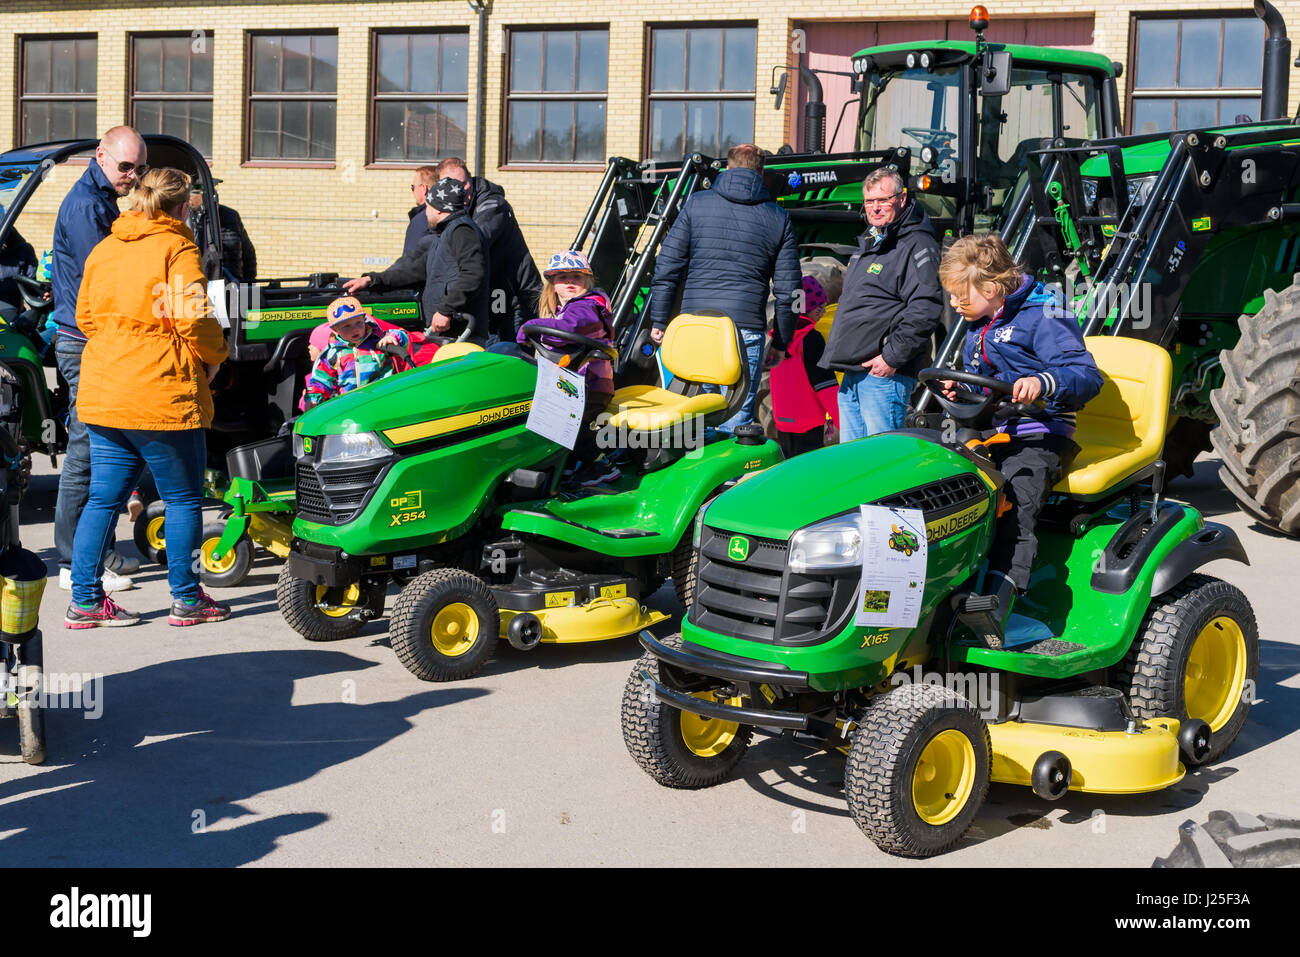 Brakne Hoby, Sweden - April 22, 2017: Documentary of small public farmers day. Families attending the John Deere tractor exhibition. Children playing  Stock Photo